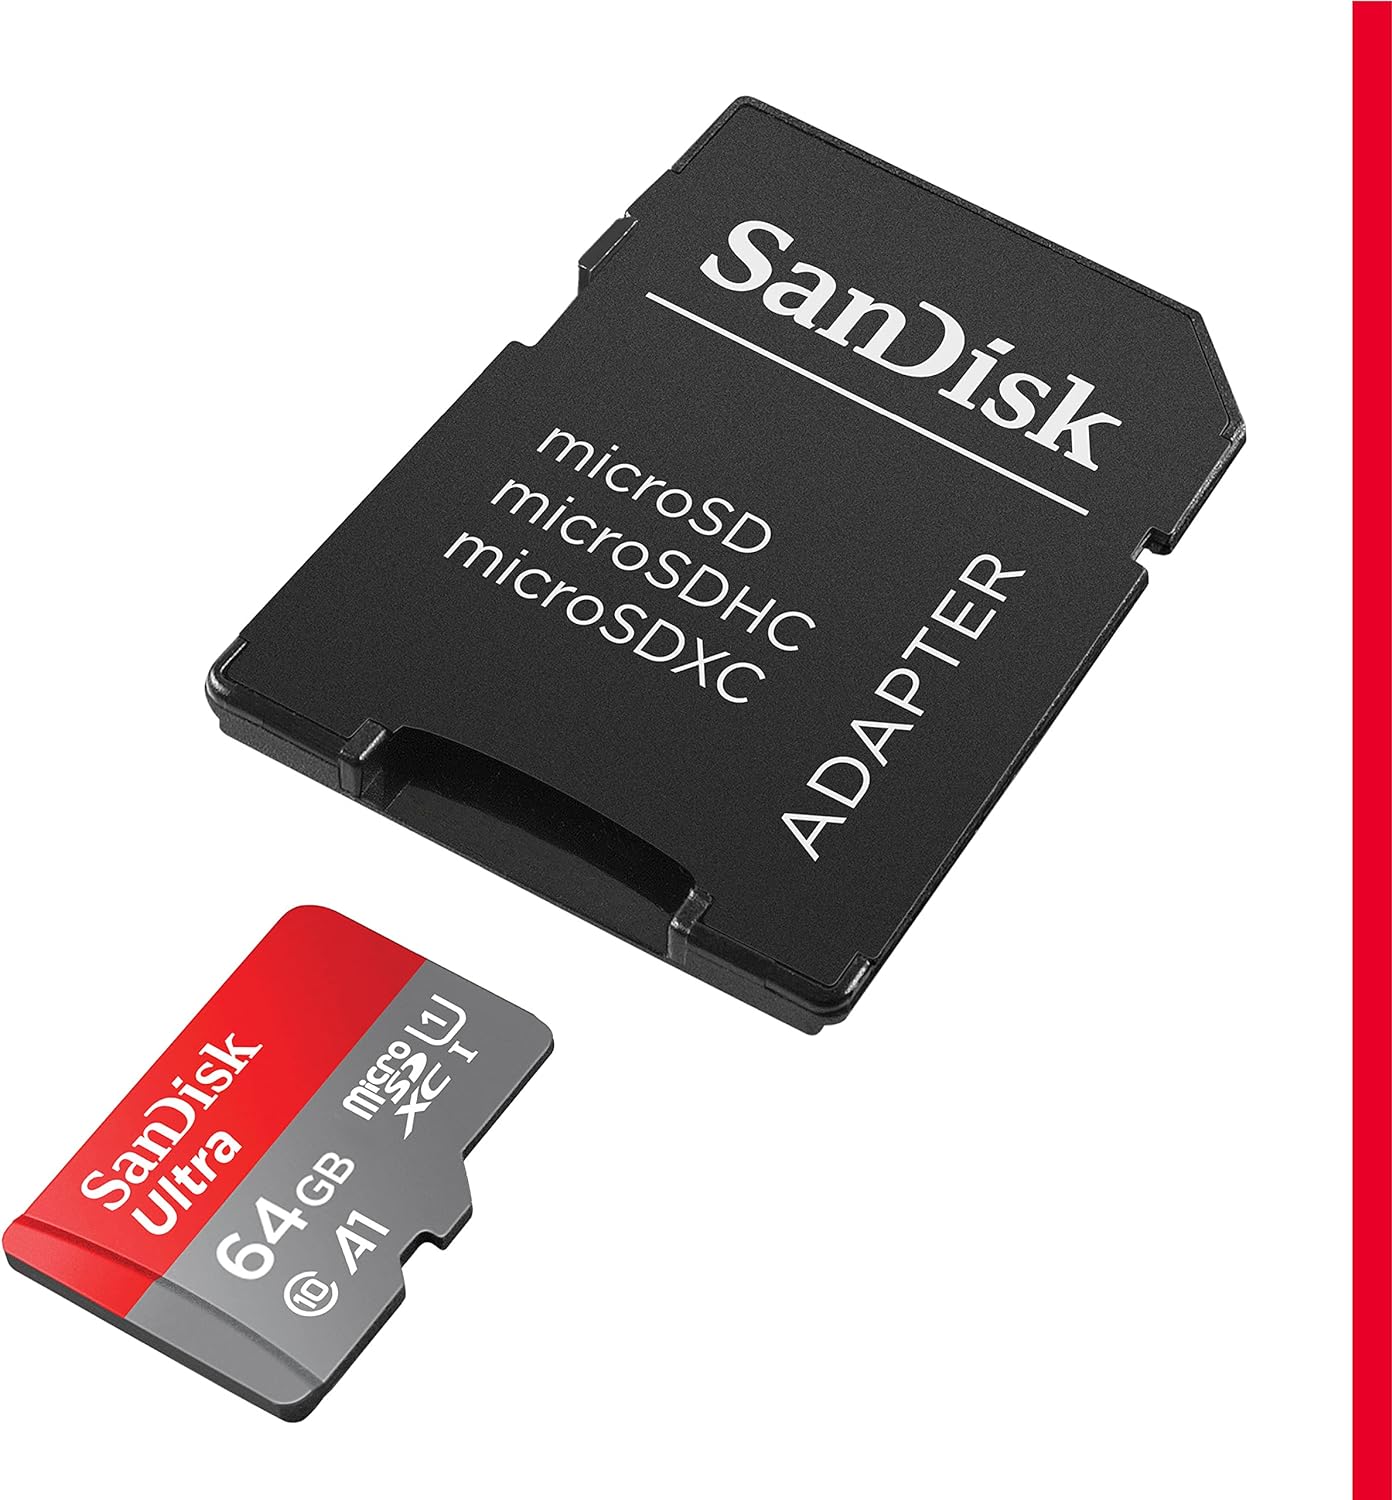 SanDisk 64GB Ultra microSDXC UHS-I Memory Card with Adapter